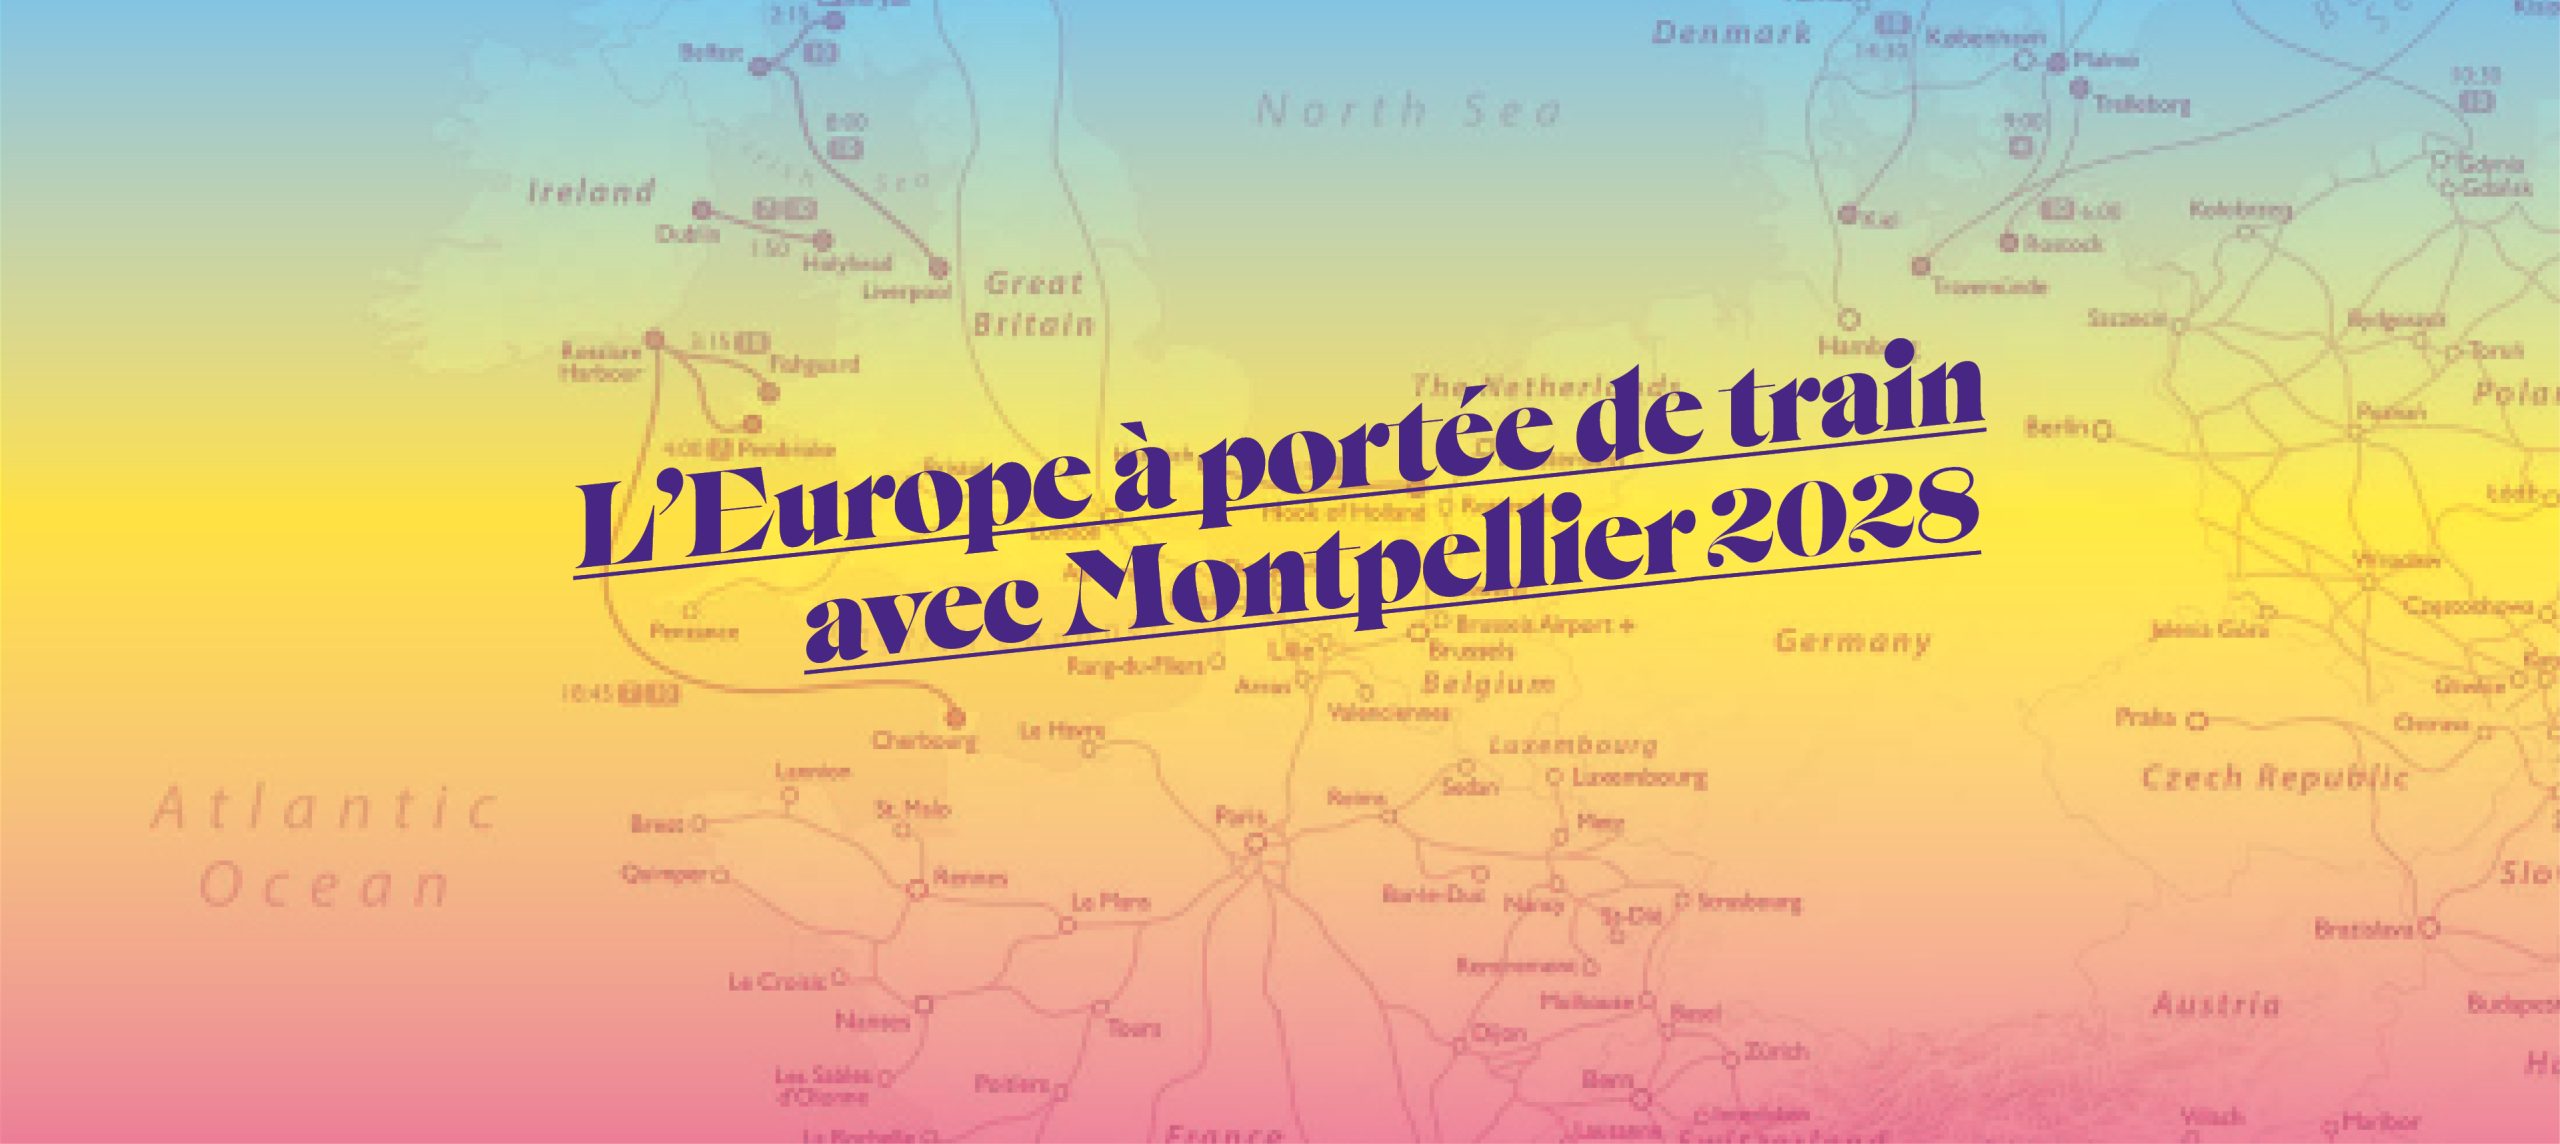 Montpellier 2028 is giving away Interrail Passes!